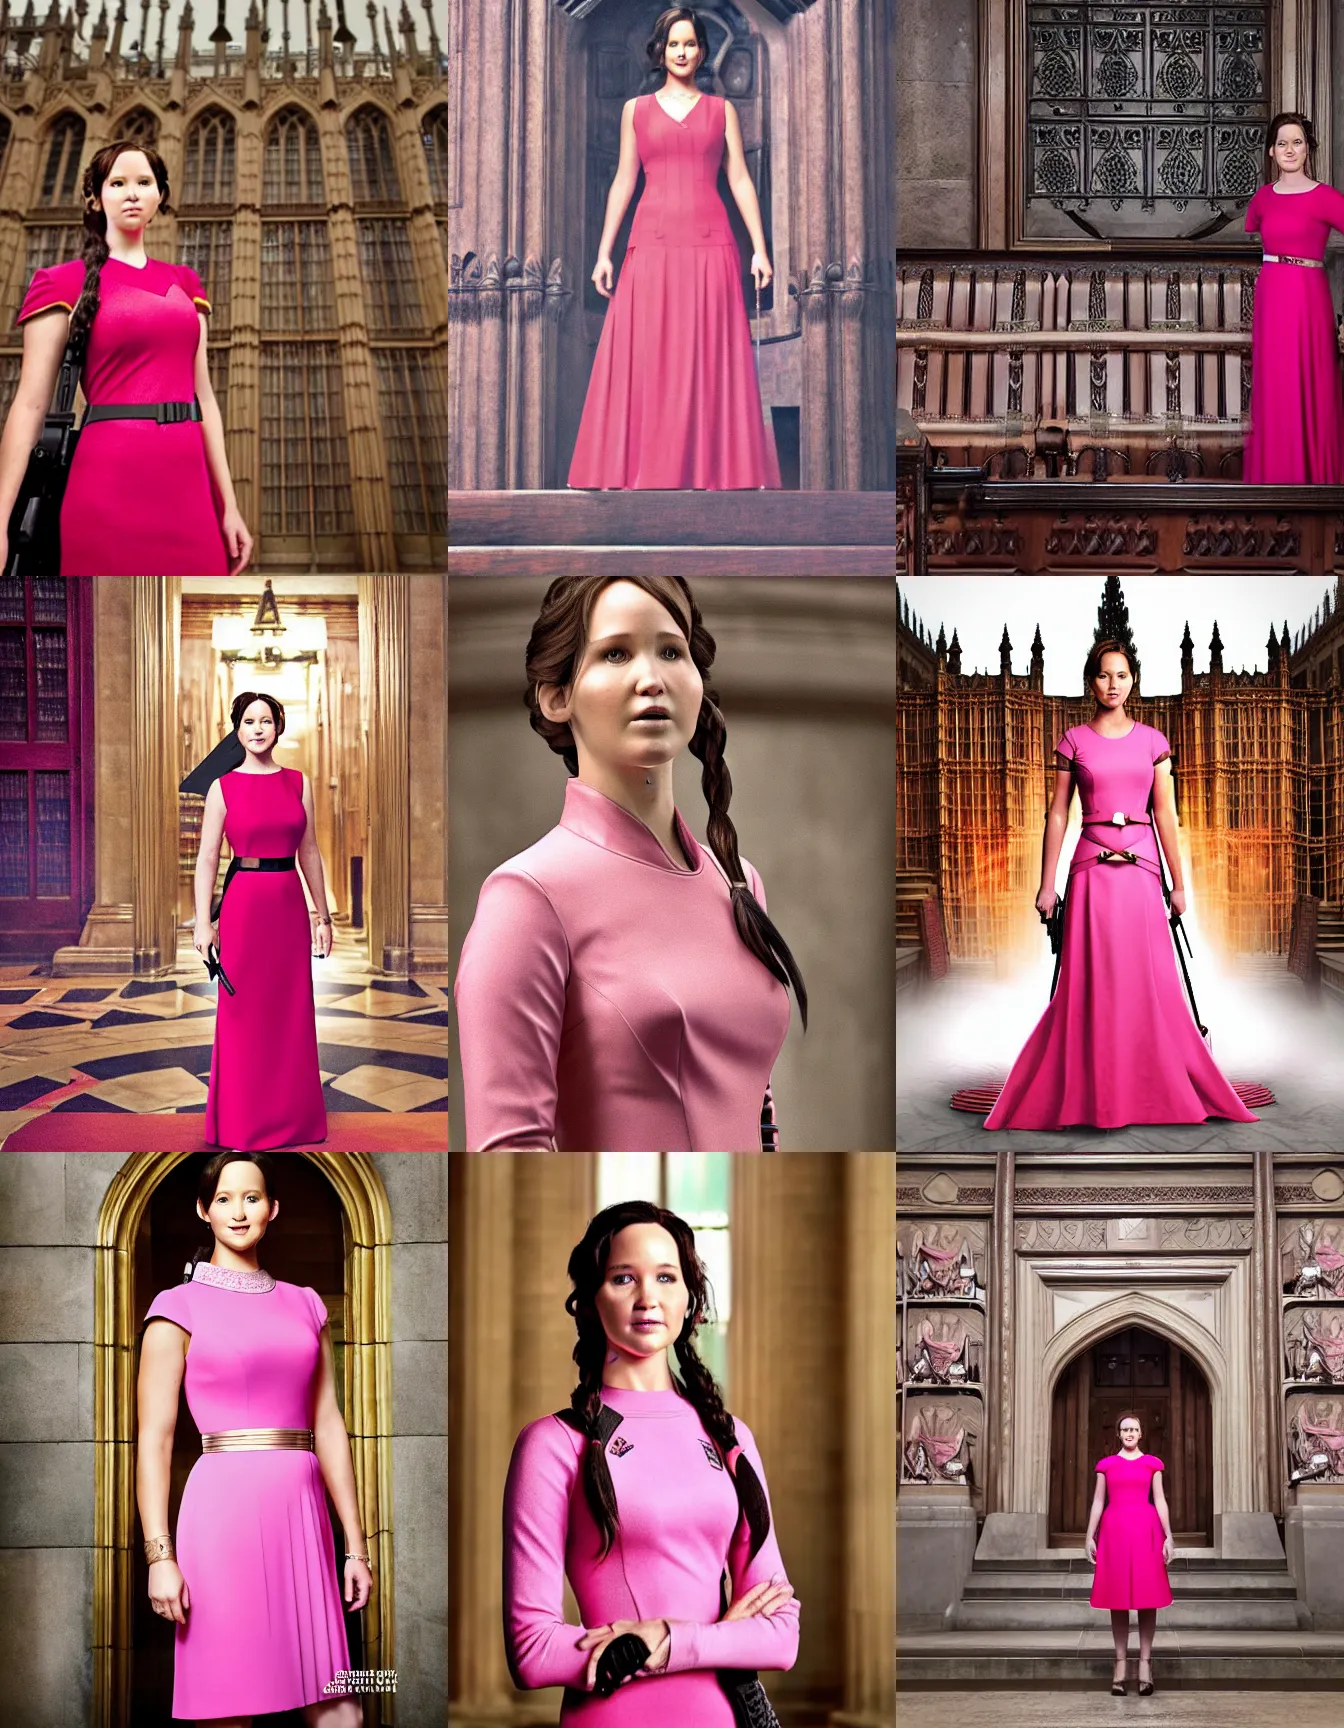 Prompt: official portrait photo of katniss everdeen, wearing a pink dress, inside the houses of parliament